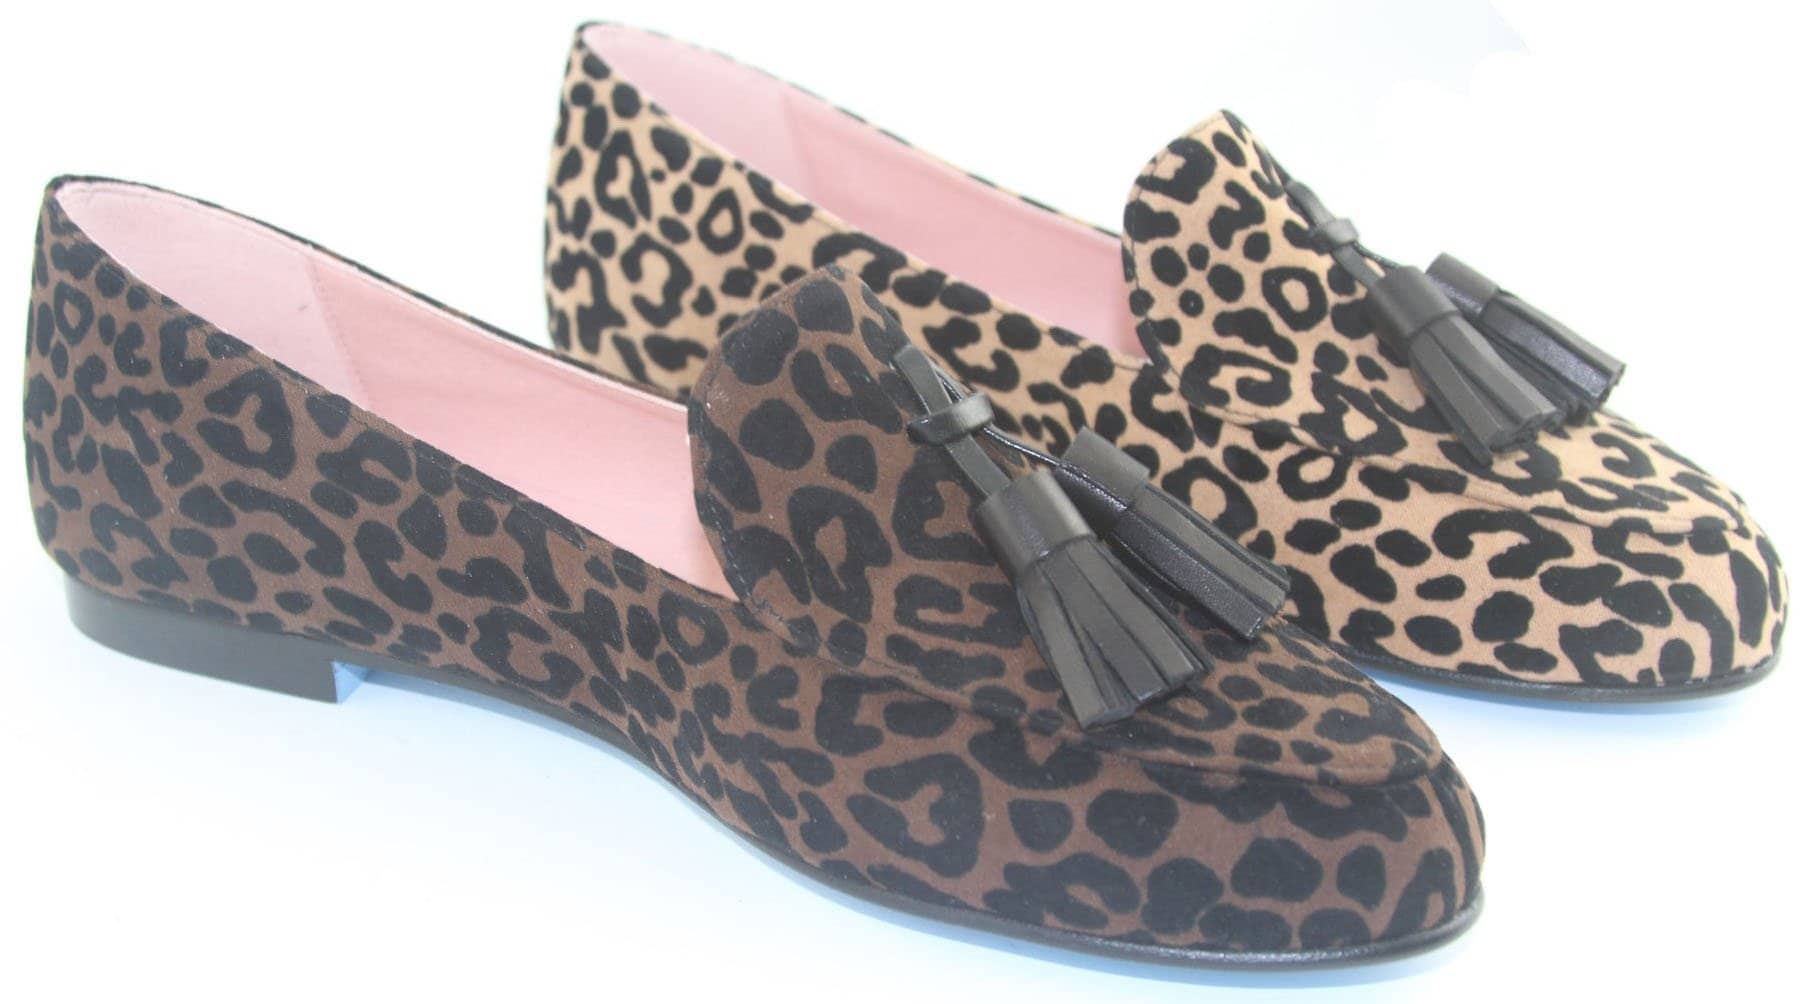 The Stacey is an animal-print tasseled loafer made from 100% recycled polyester with a suede-like finish